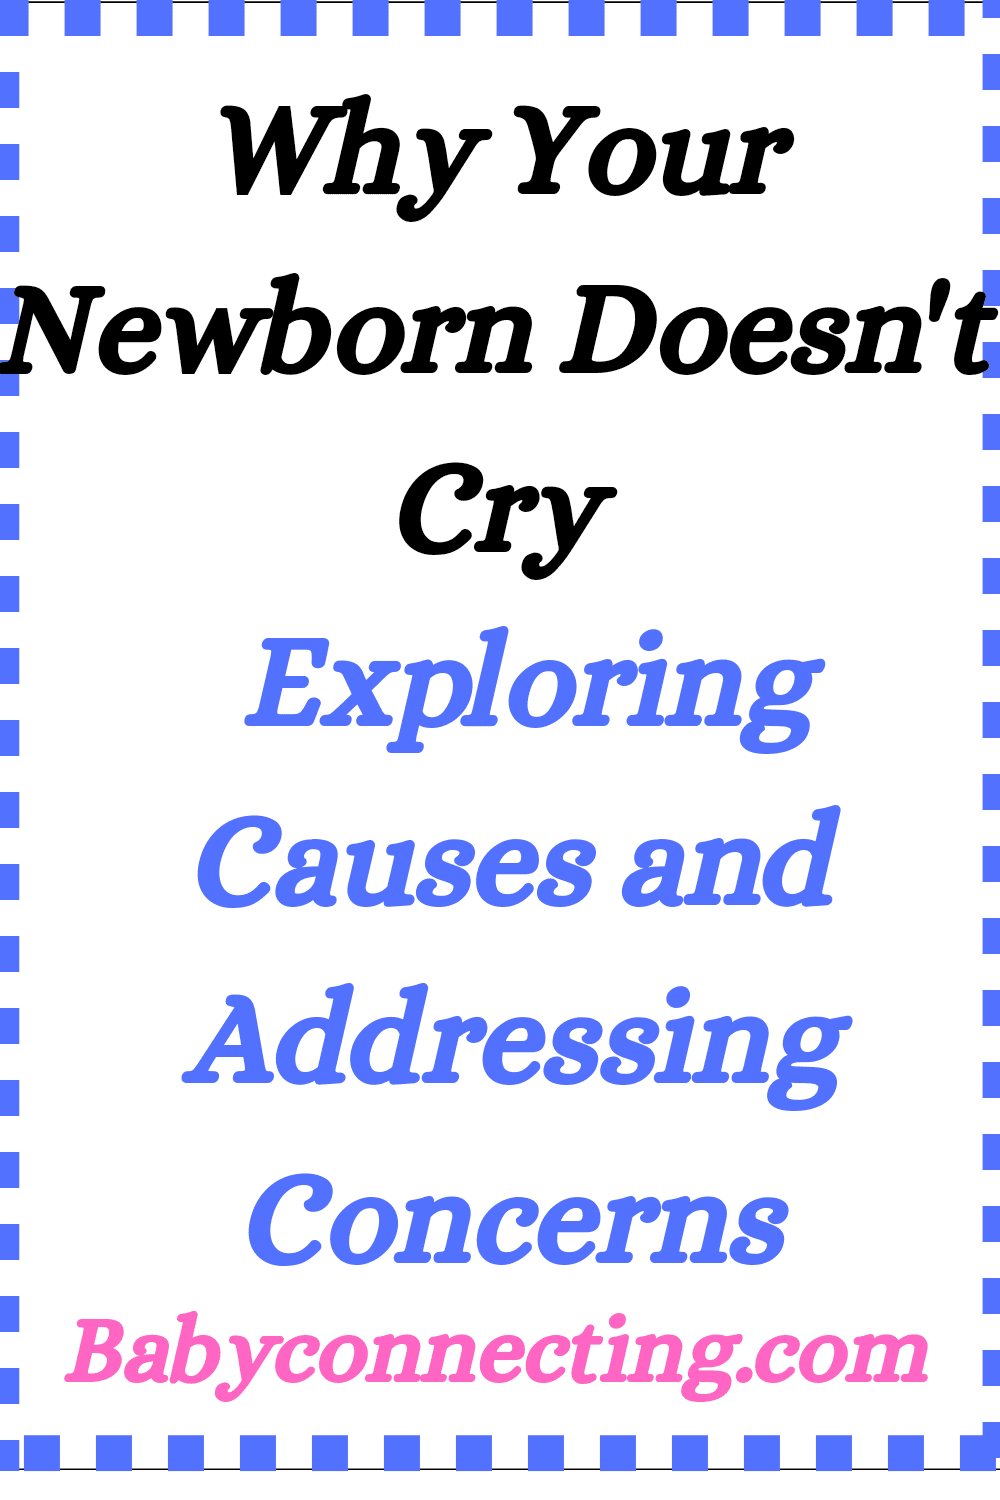 Why Your Newborn Doesn't Cry: Exploring Causes and Addressing Concerns